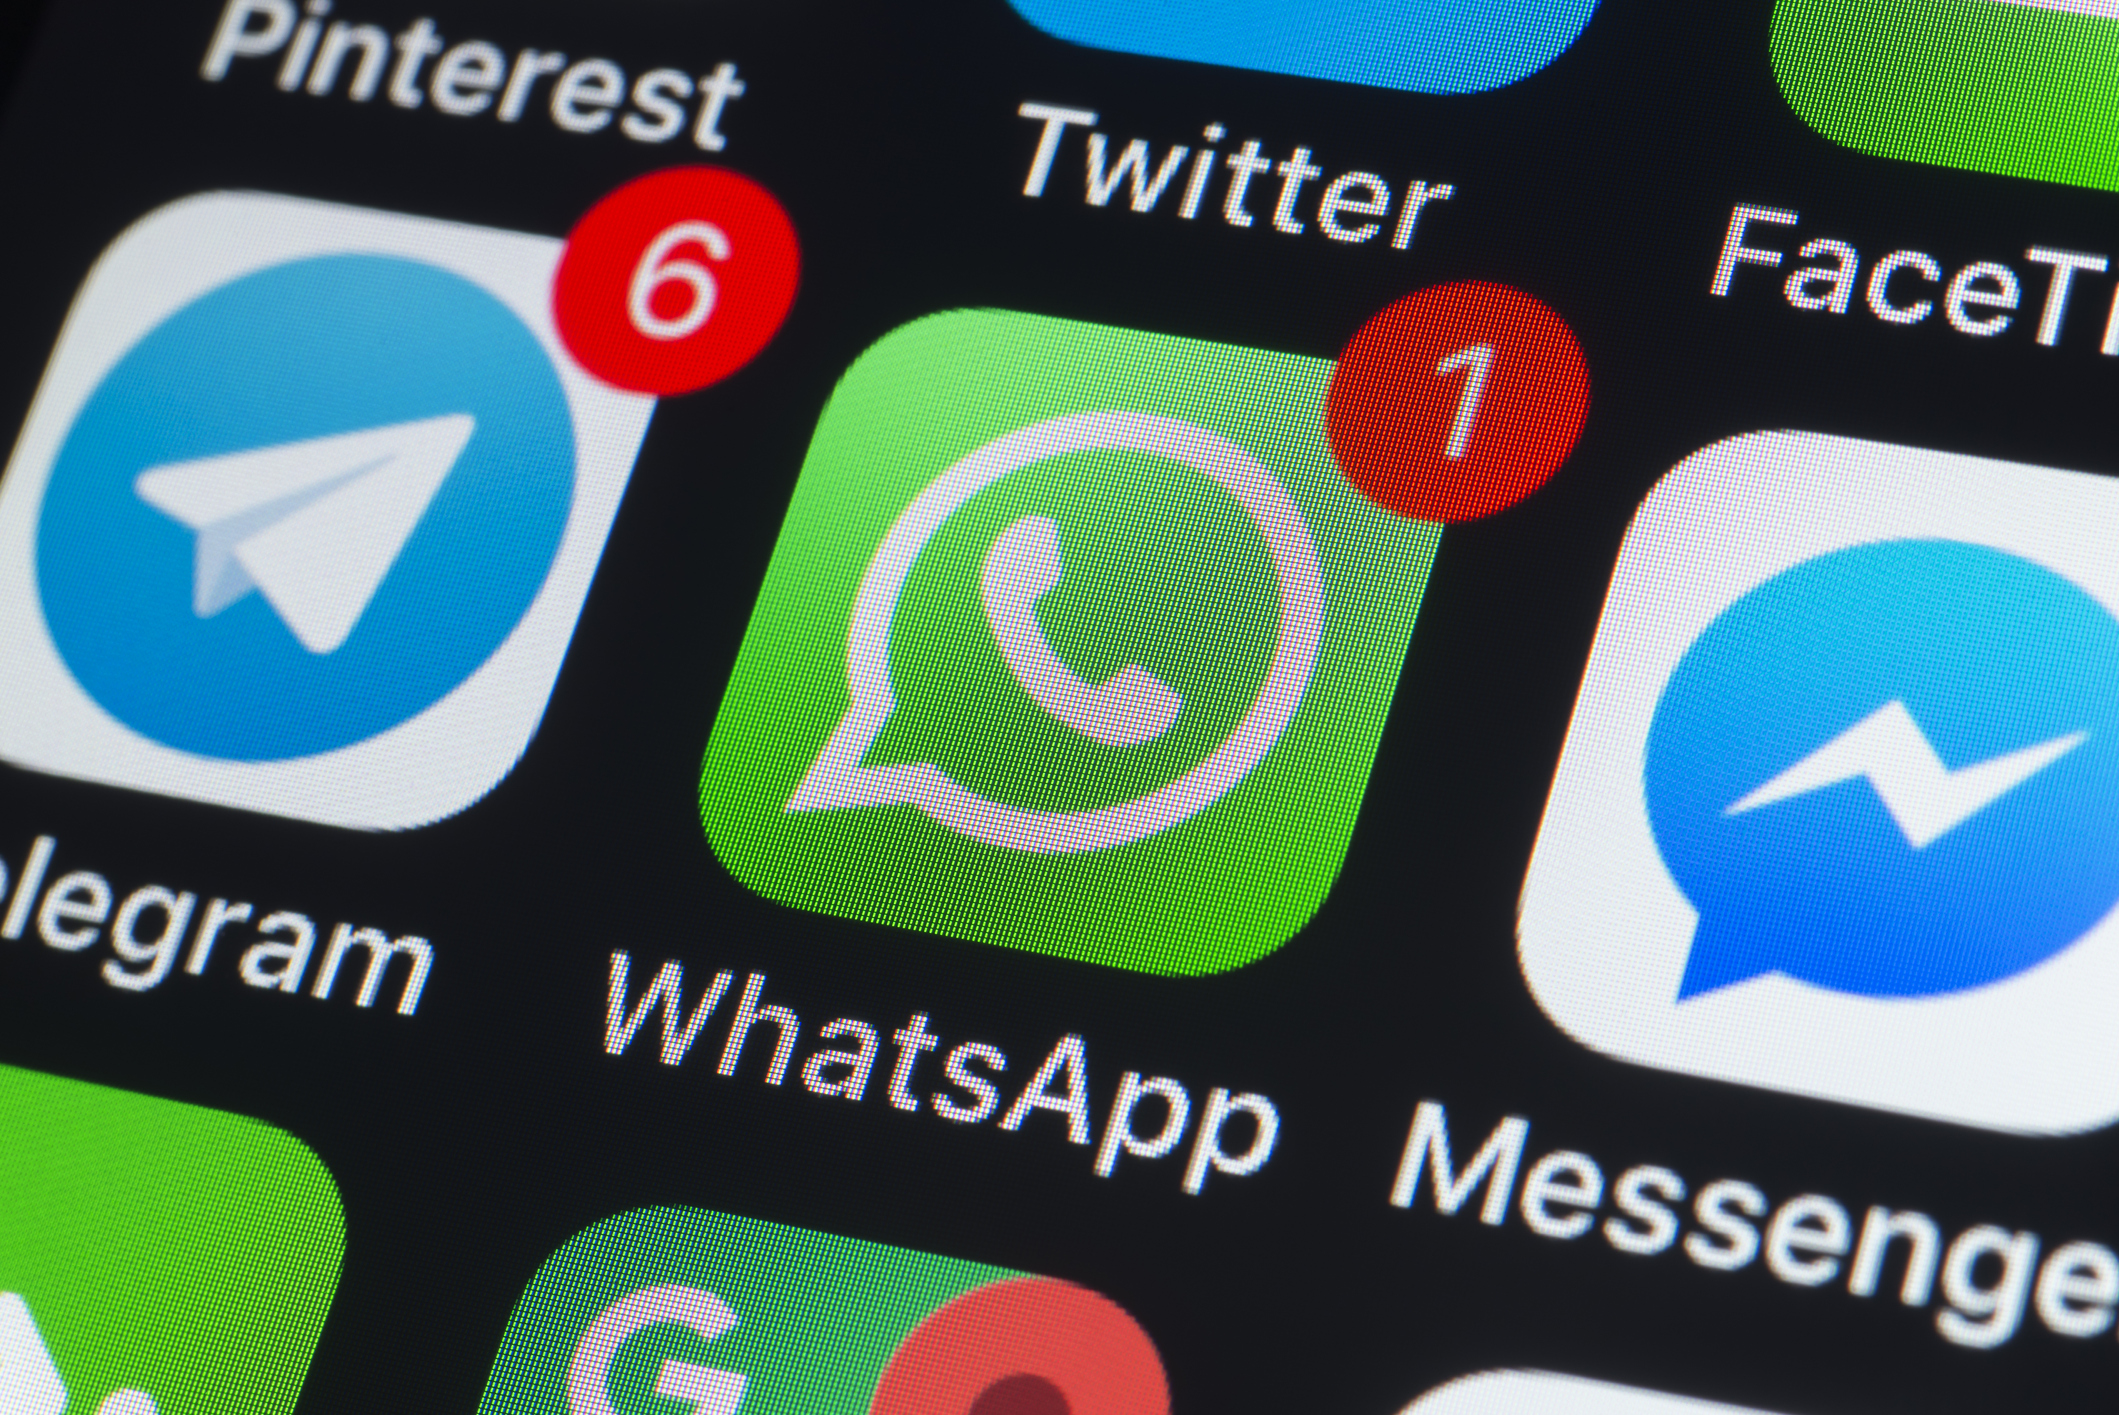 Whatsapp, Messenger, Telegram and other phone chat Apps on iPhone screen